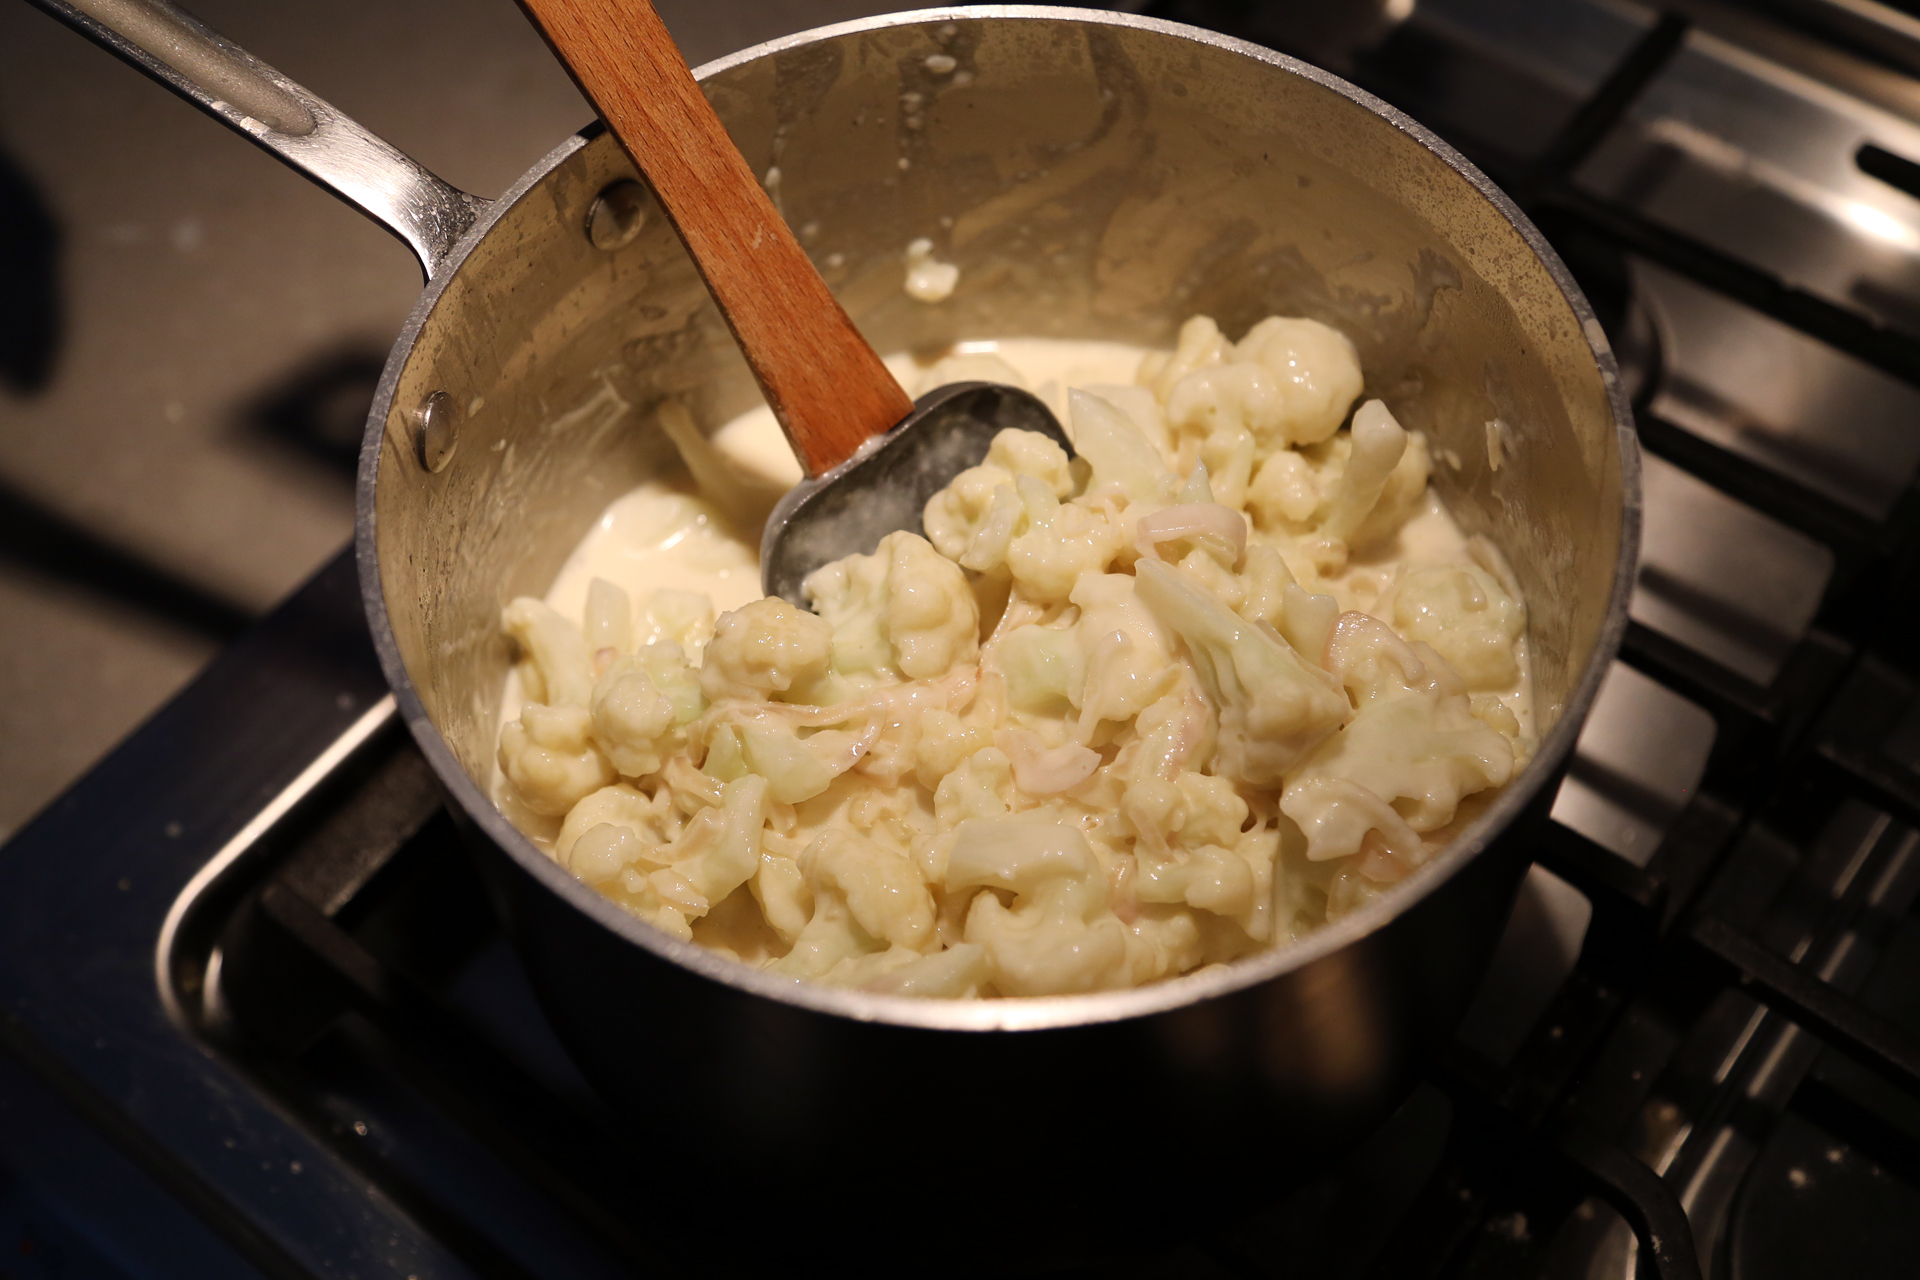 Add the cauliflower to the sauce and stir to combine.